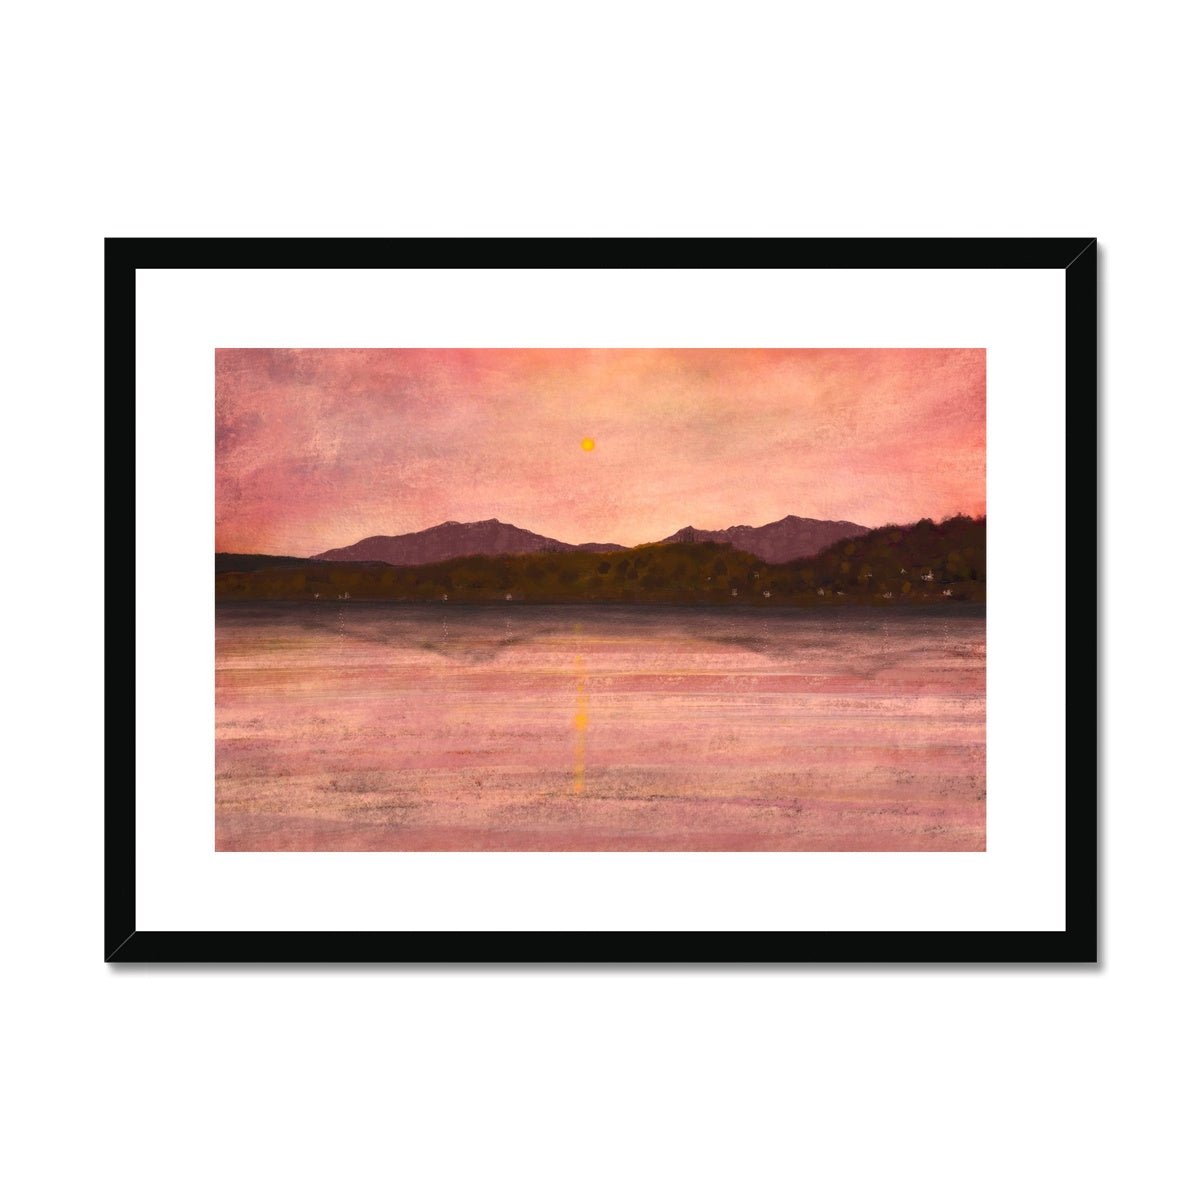 Dusk Over Arran & Bute Painting | Framed & Mounted Prints From Scotland-Framed & Mounted Prints-Arran Art Gallery-A2 Landscape-Black Frame-Paintings, Prints, Homeware, Art Gifts From Scotland By Scottish Artist Kevin Hunter